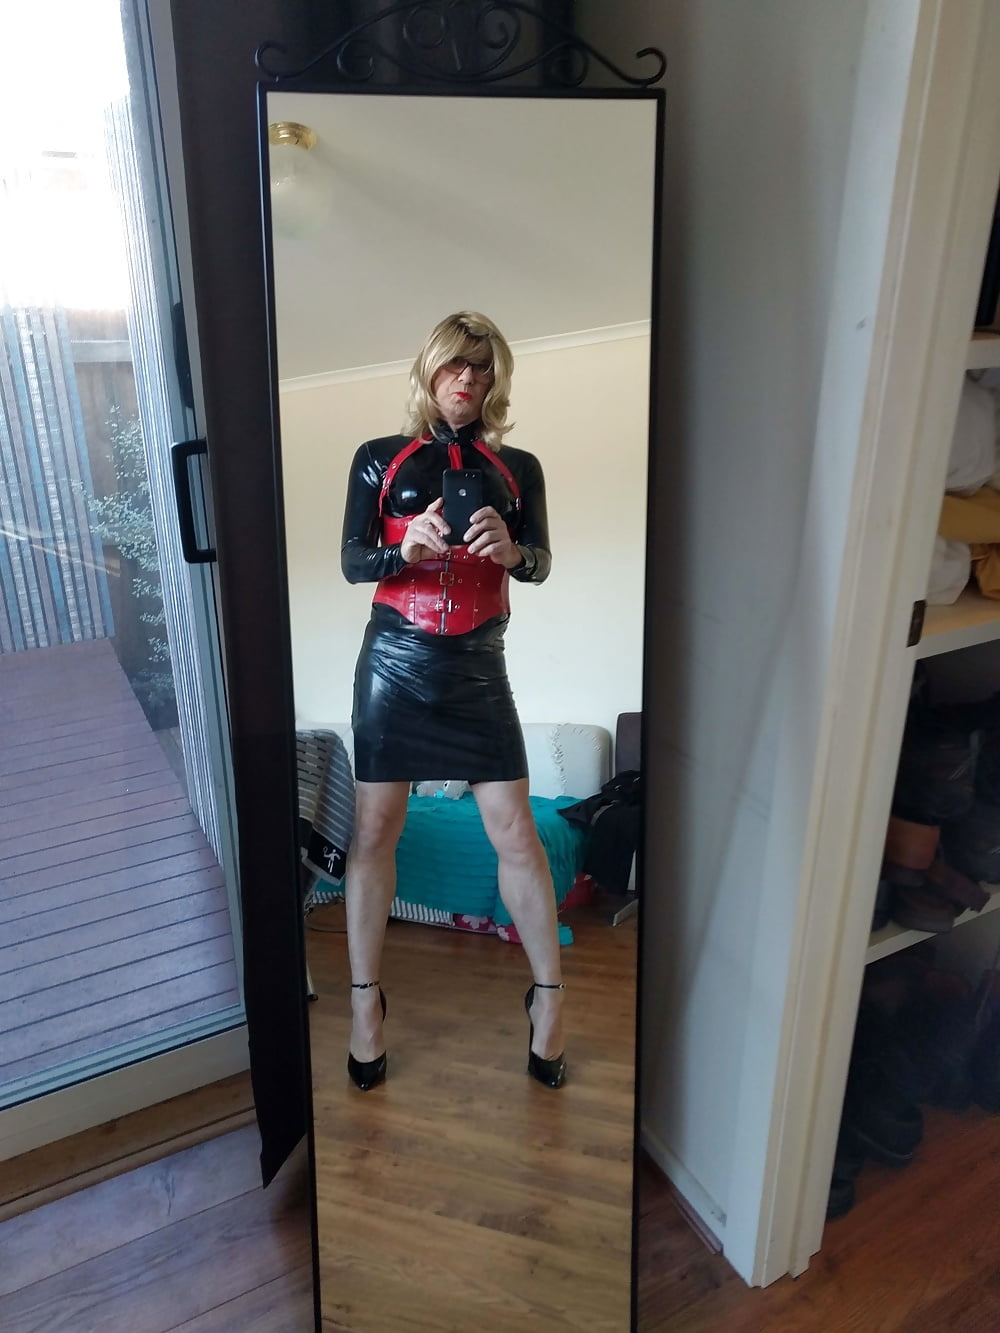 New latex skirt on a sunny Melbourne day #107021274